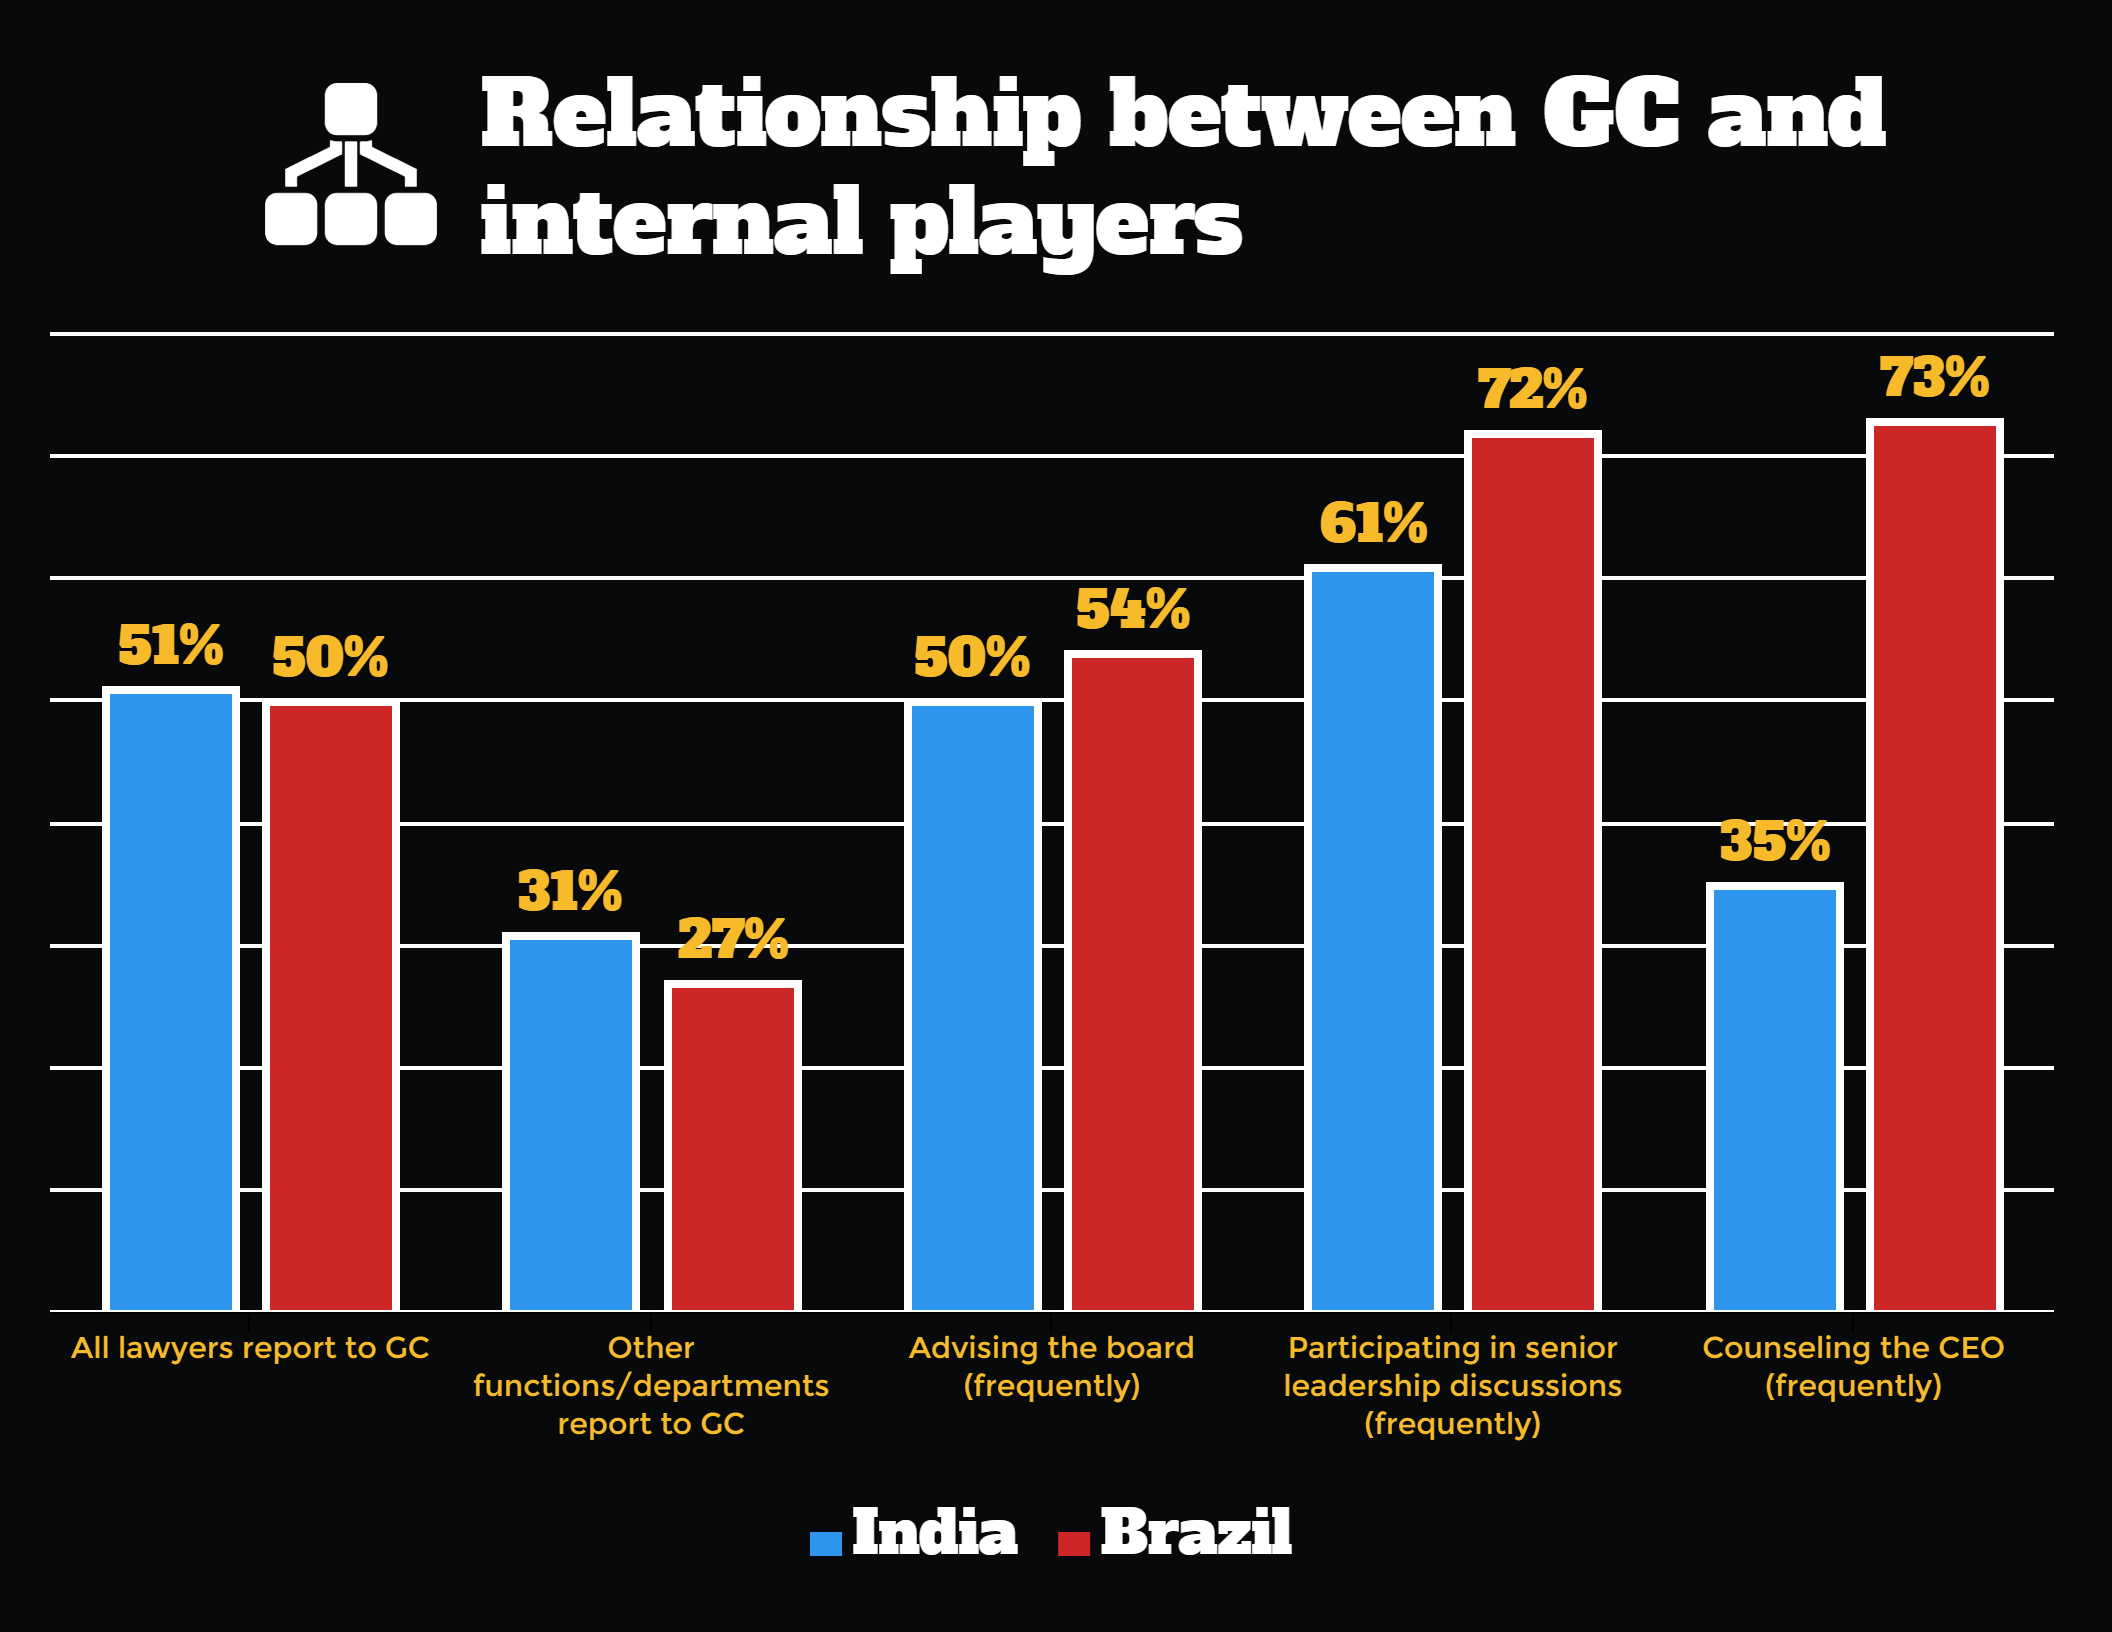 Relationship between general counsel and internal players in India and Brazil